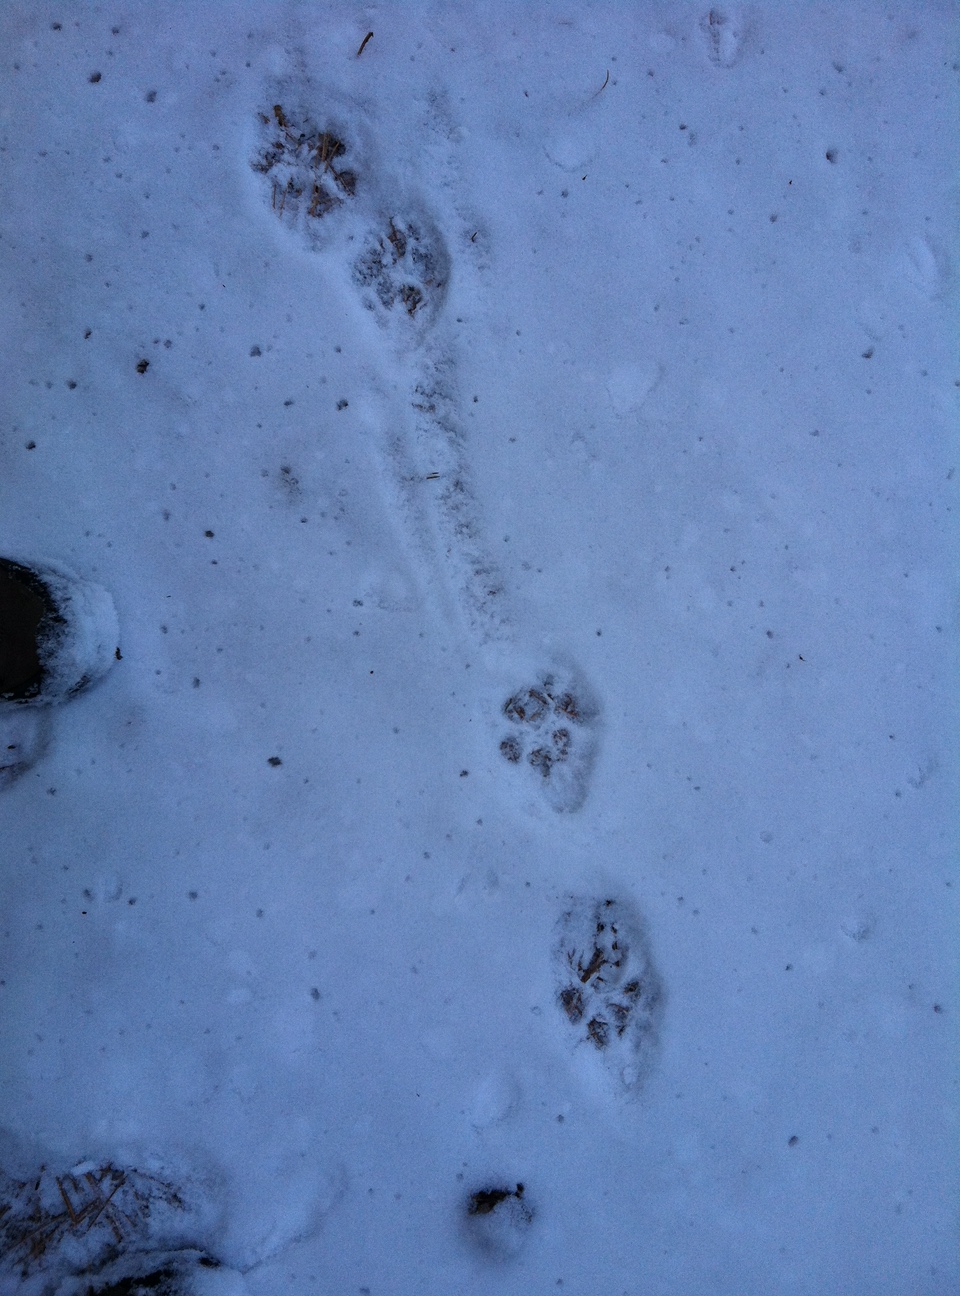 Mountain lion tracks in the snow